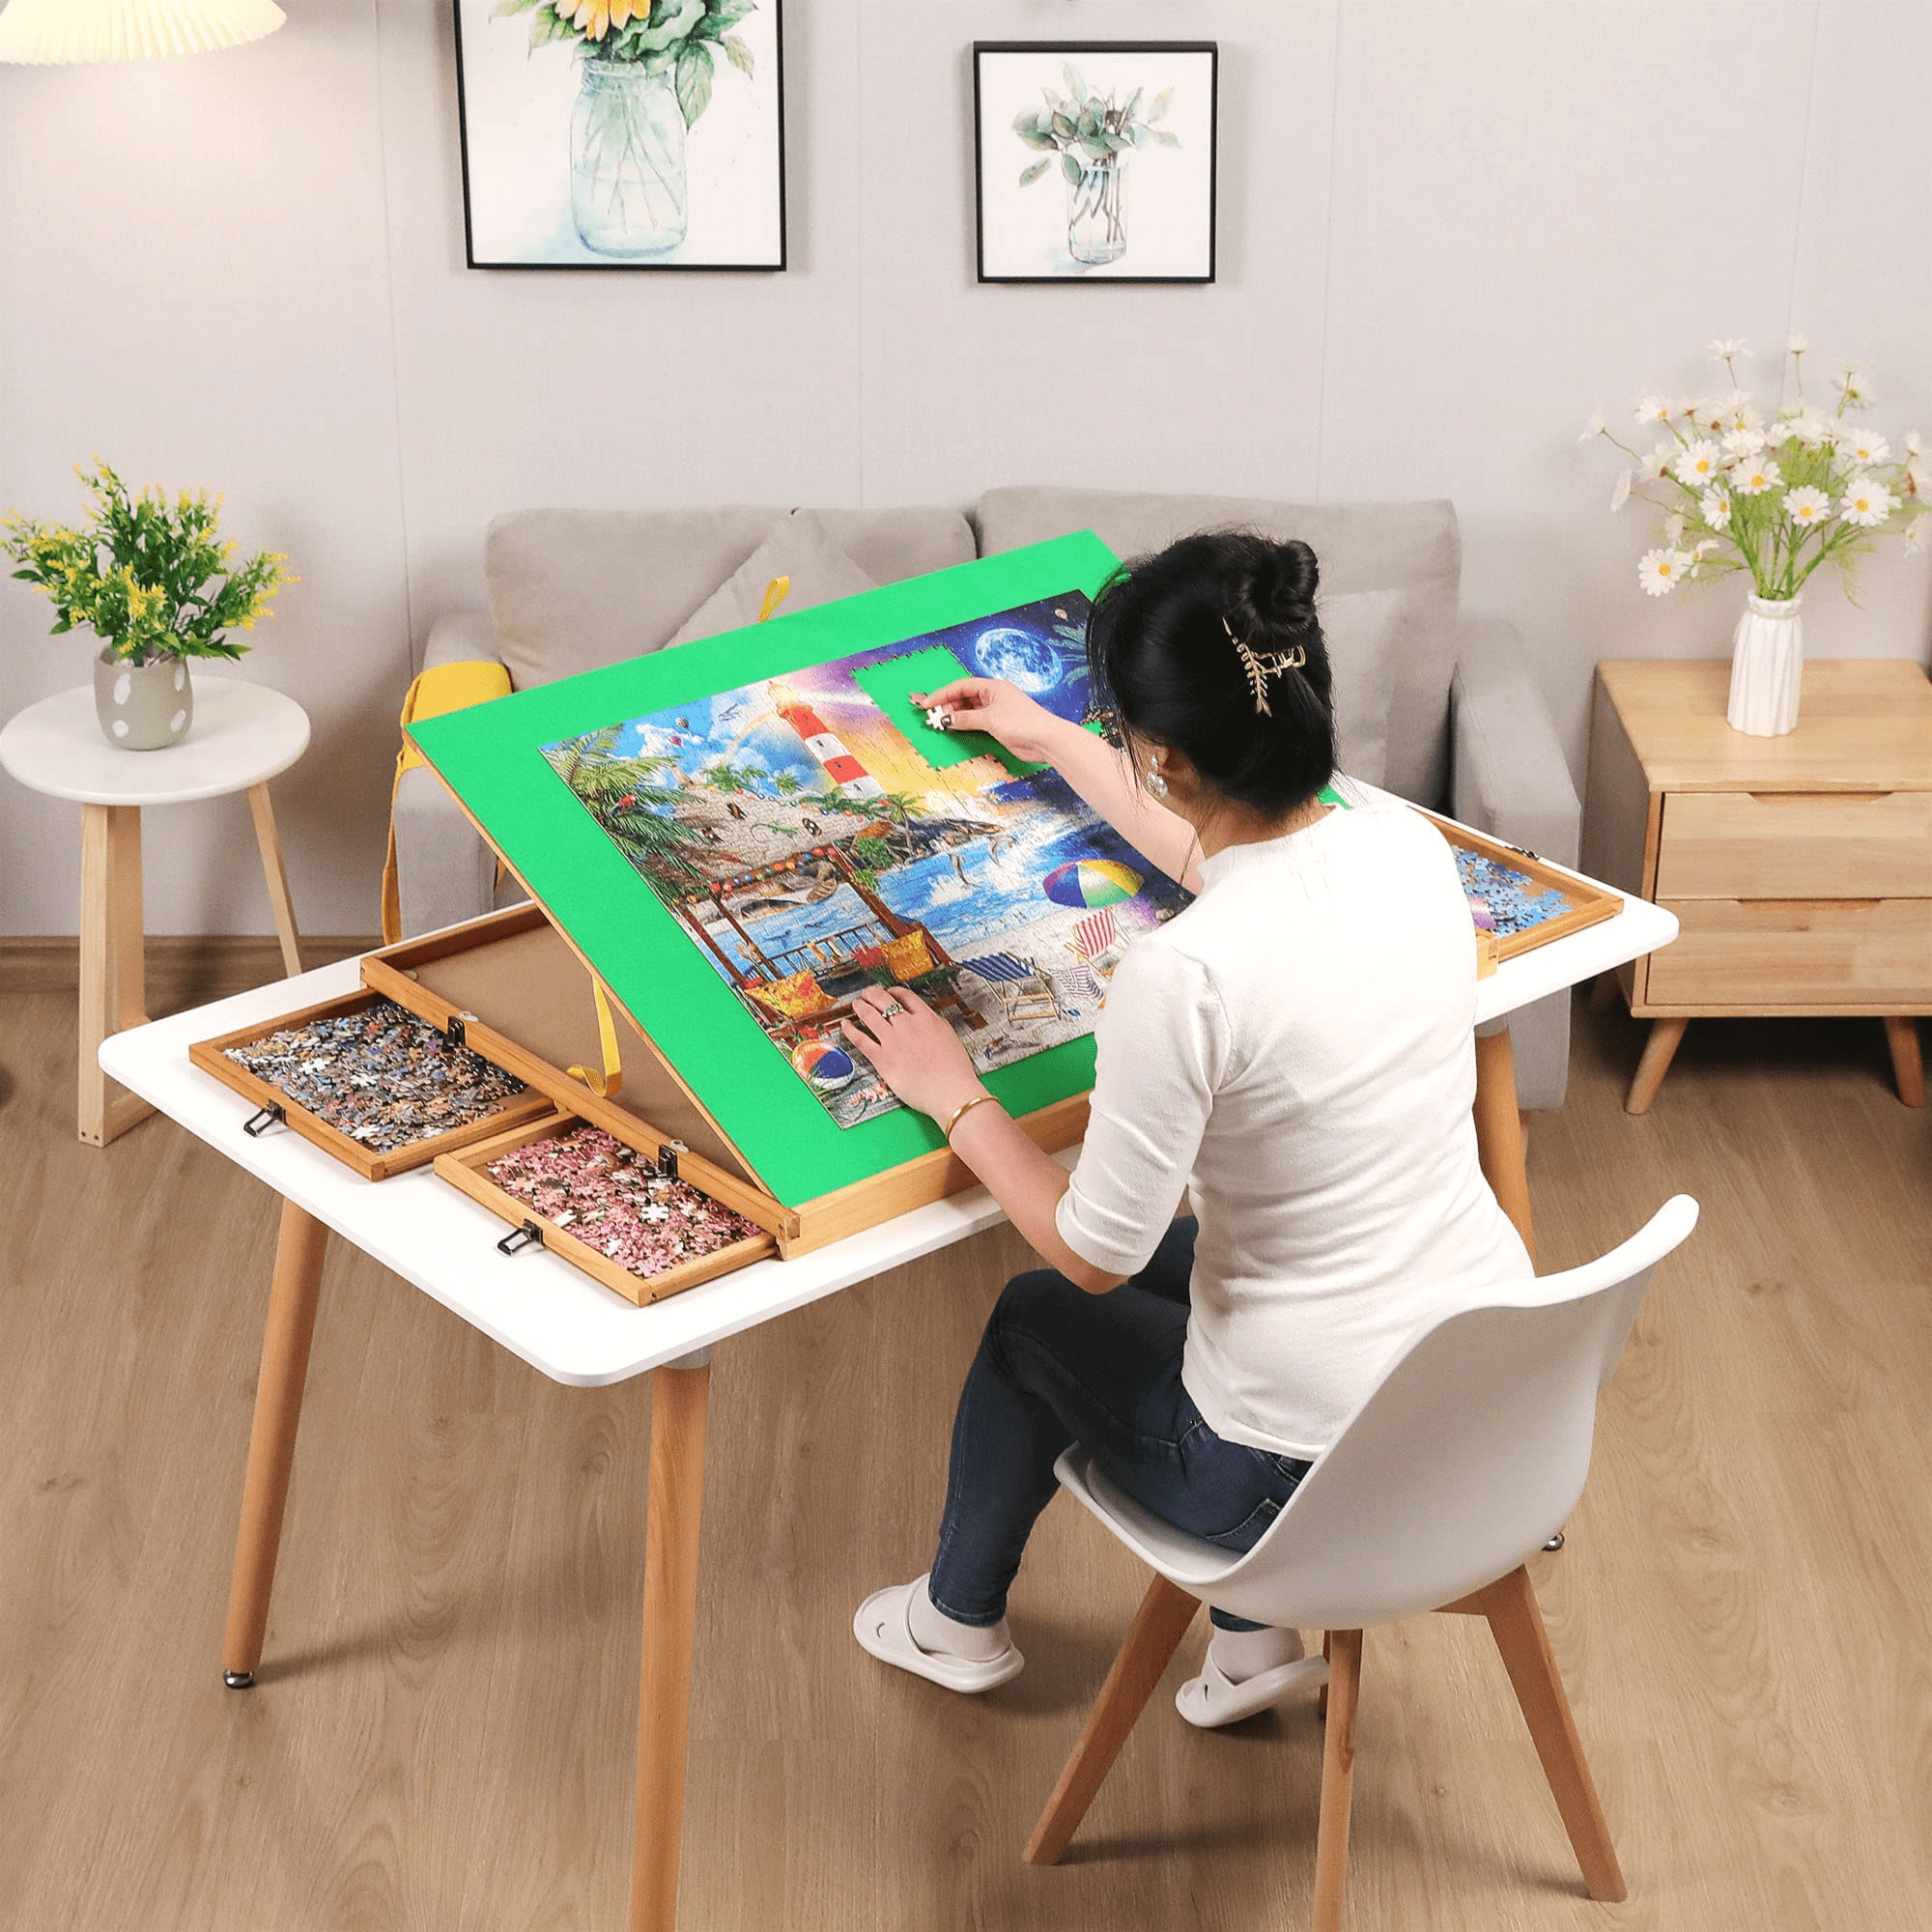 Wooden Jigsaw Puzzle Board Table for 1500 Pieces With Drawers and Cover,  Adjustable Puzzle Easel With Handle 